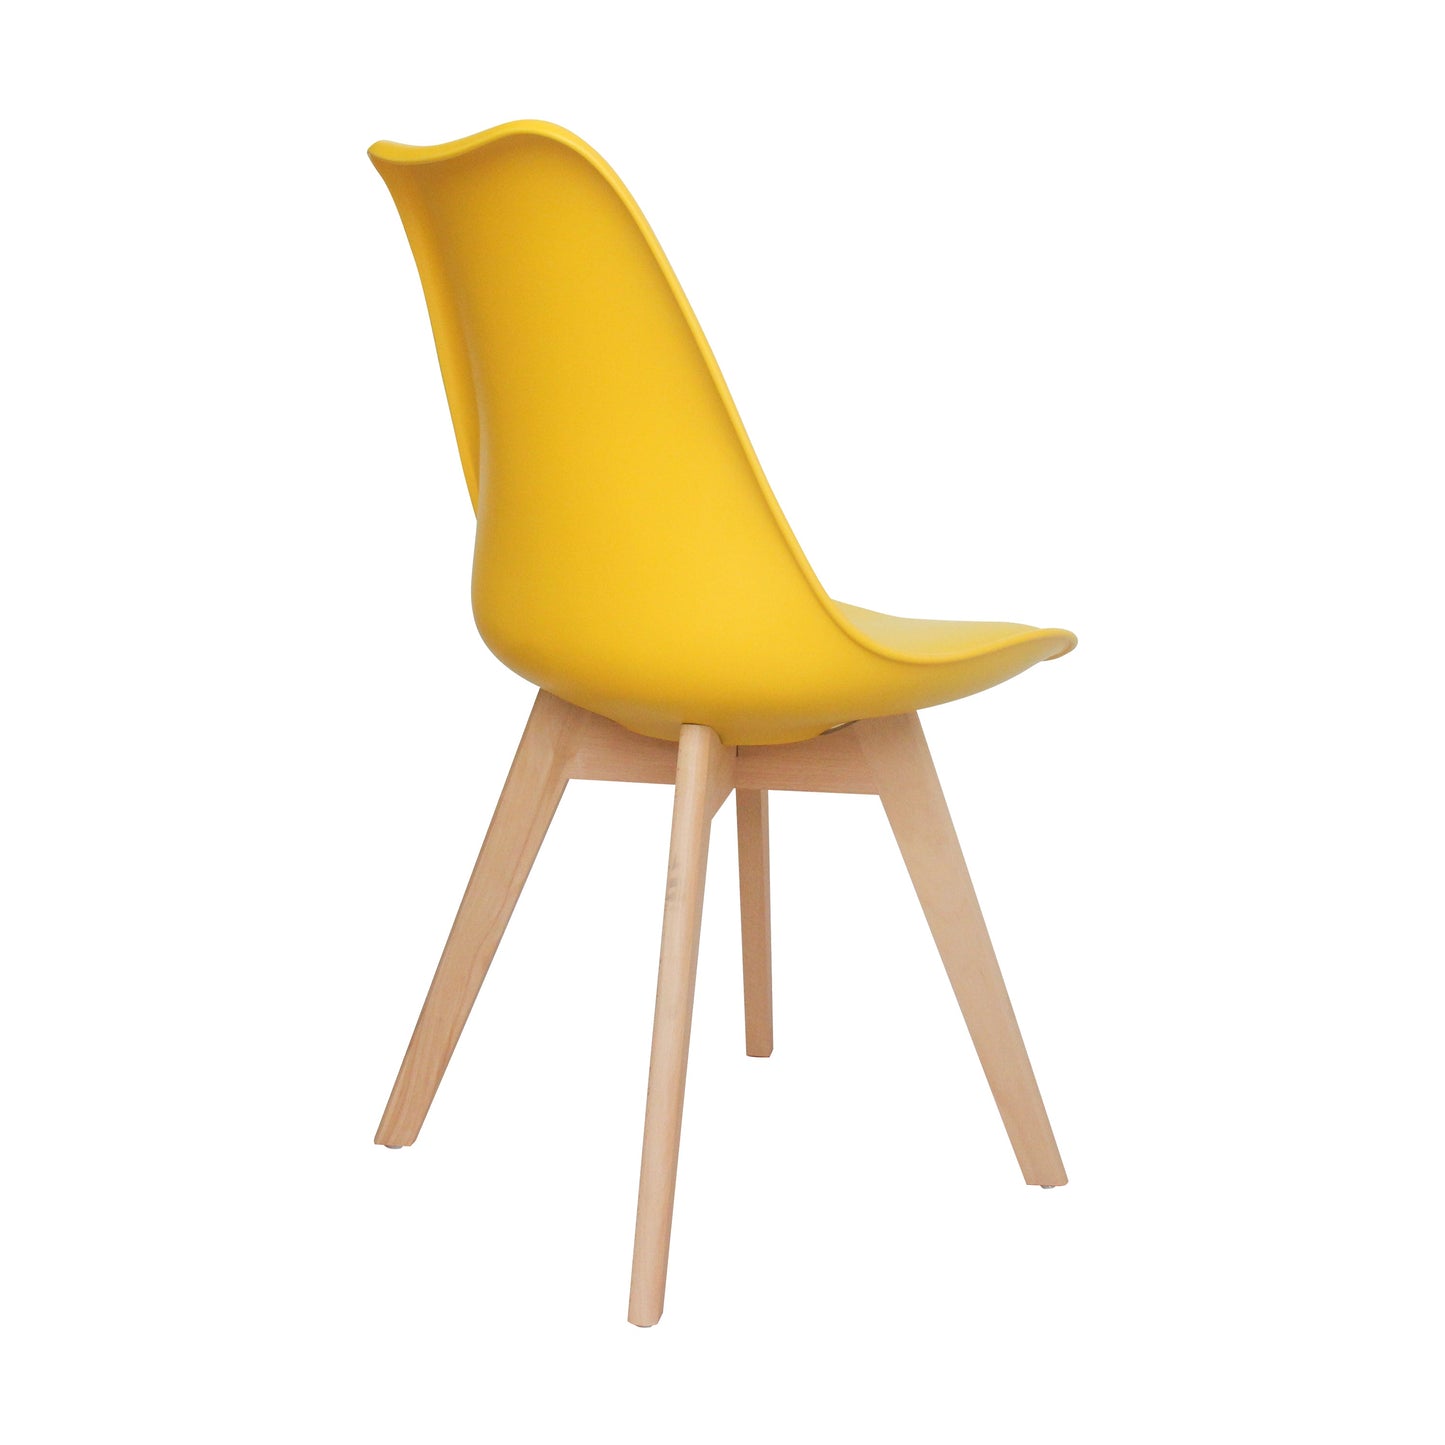 CHOTTO - Ando Dining Chairs - Yellow x 4